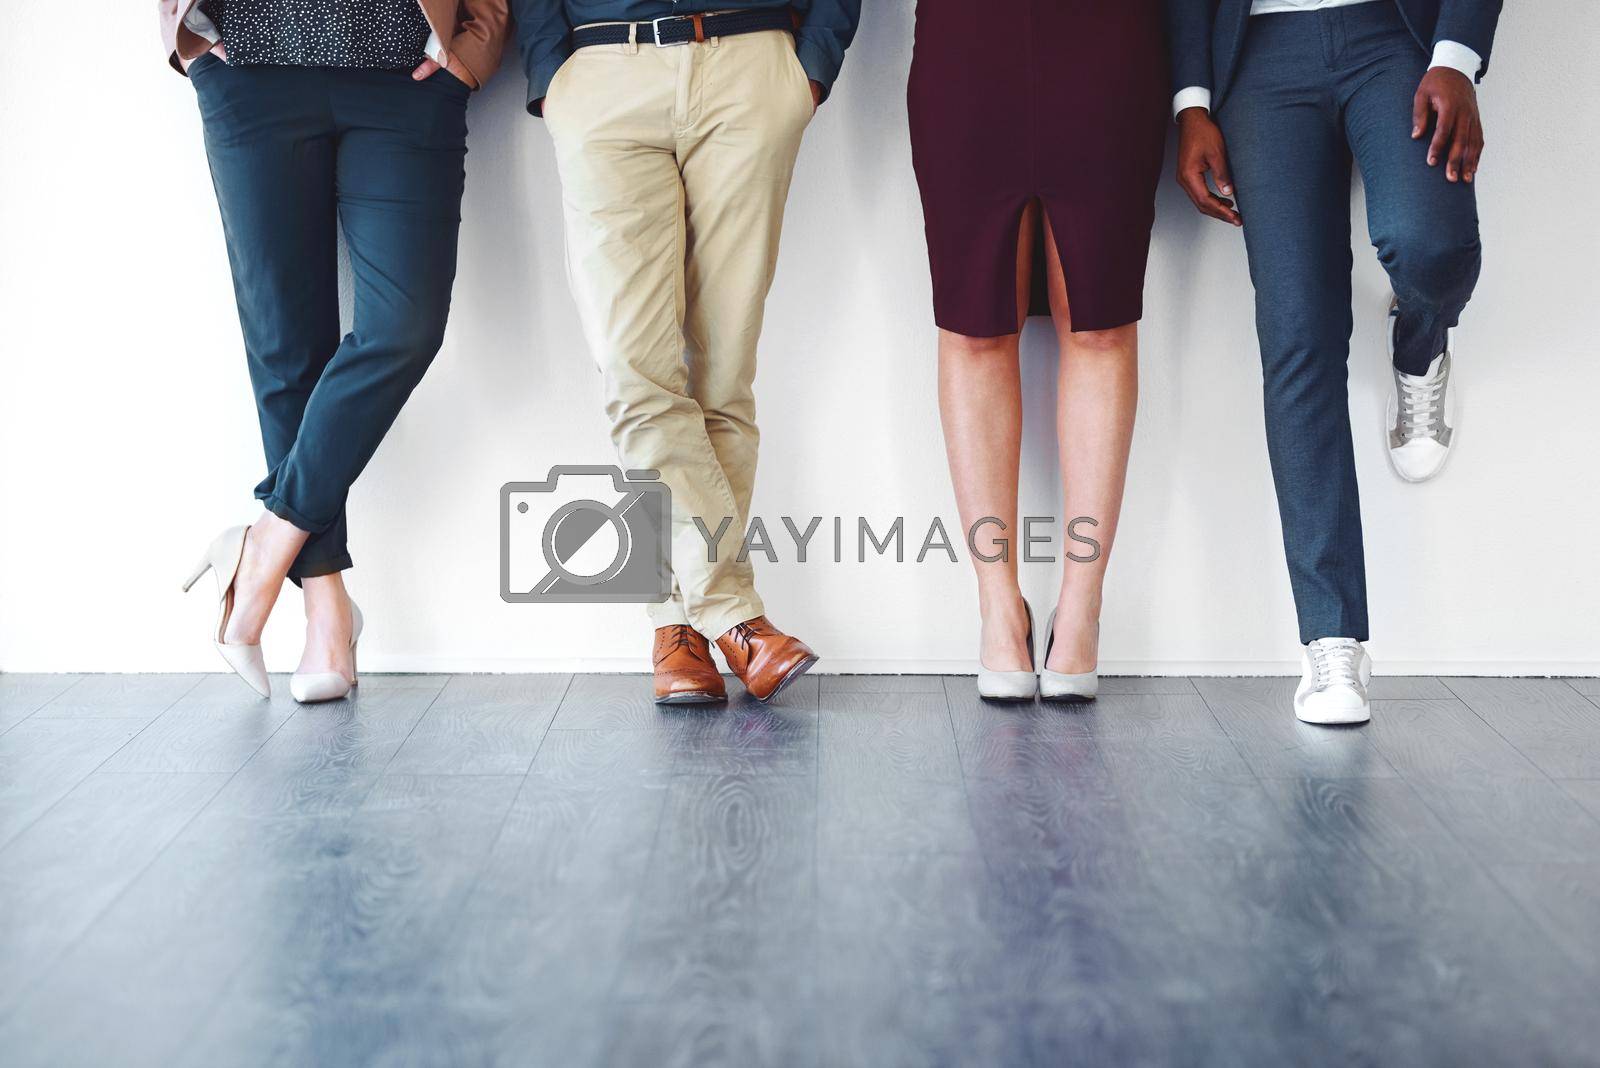 Royalty free image of Its all in your body language. Cropped shot of a group of unrecognizable people standing against a white background. by YuriArcurs